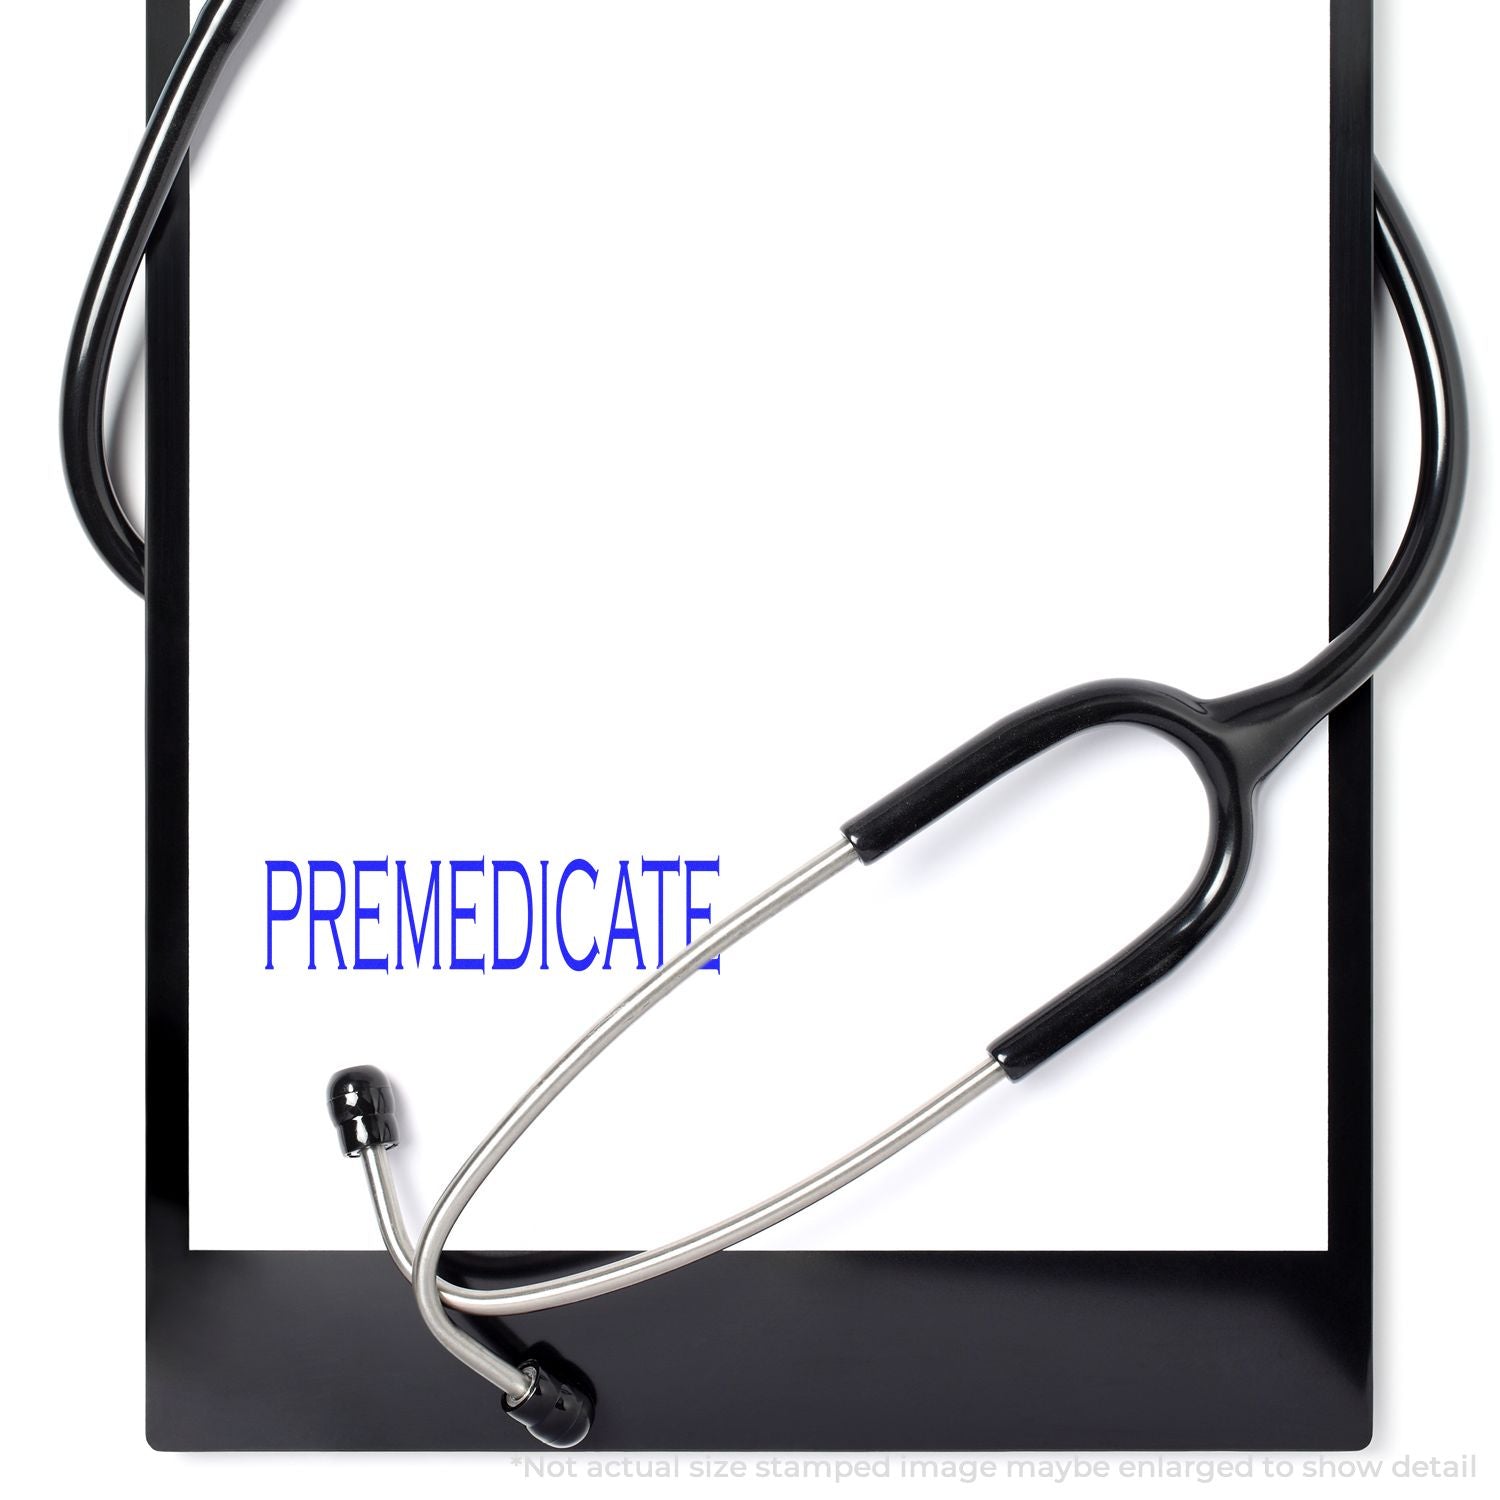 A self-inking stamp with a stamped image showing how the text "PREMEDICATE" is displayed after stamping.